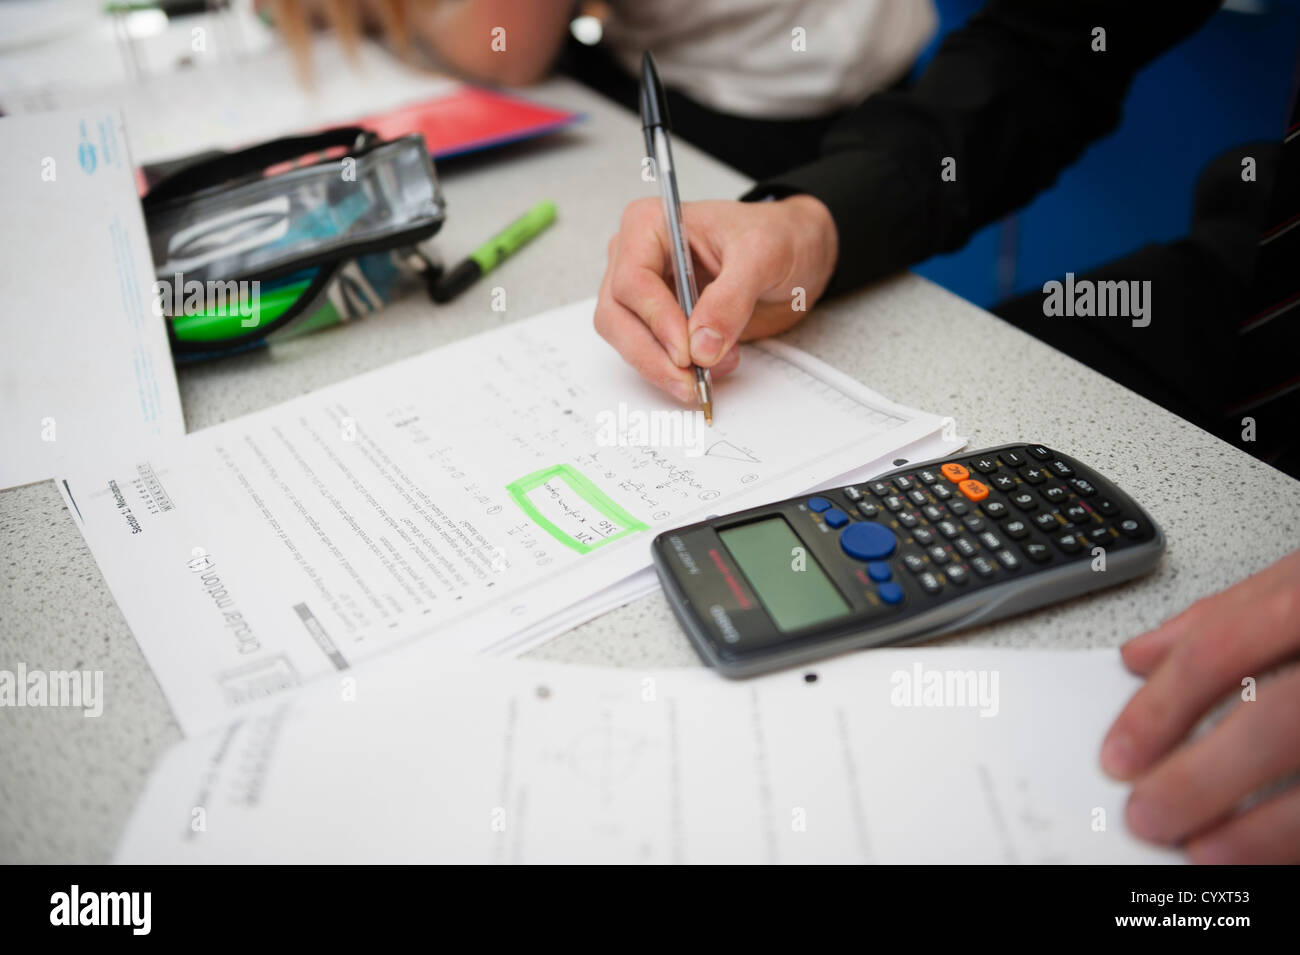 6th form year 13 girls in an science class lesson at a secondary comprehensive school, Wales UK using calculator Stock Photo